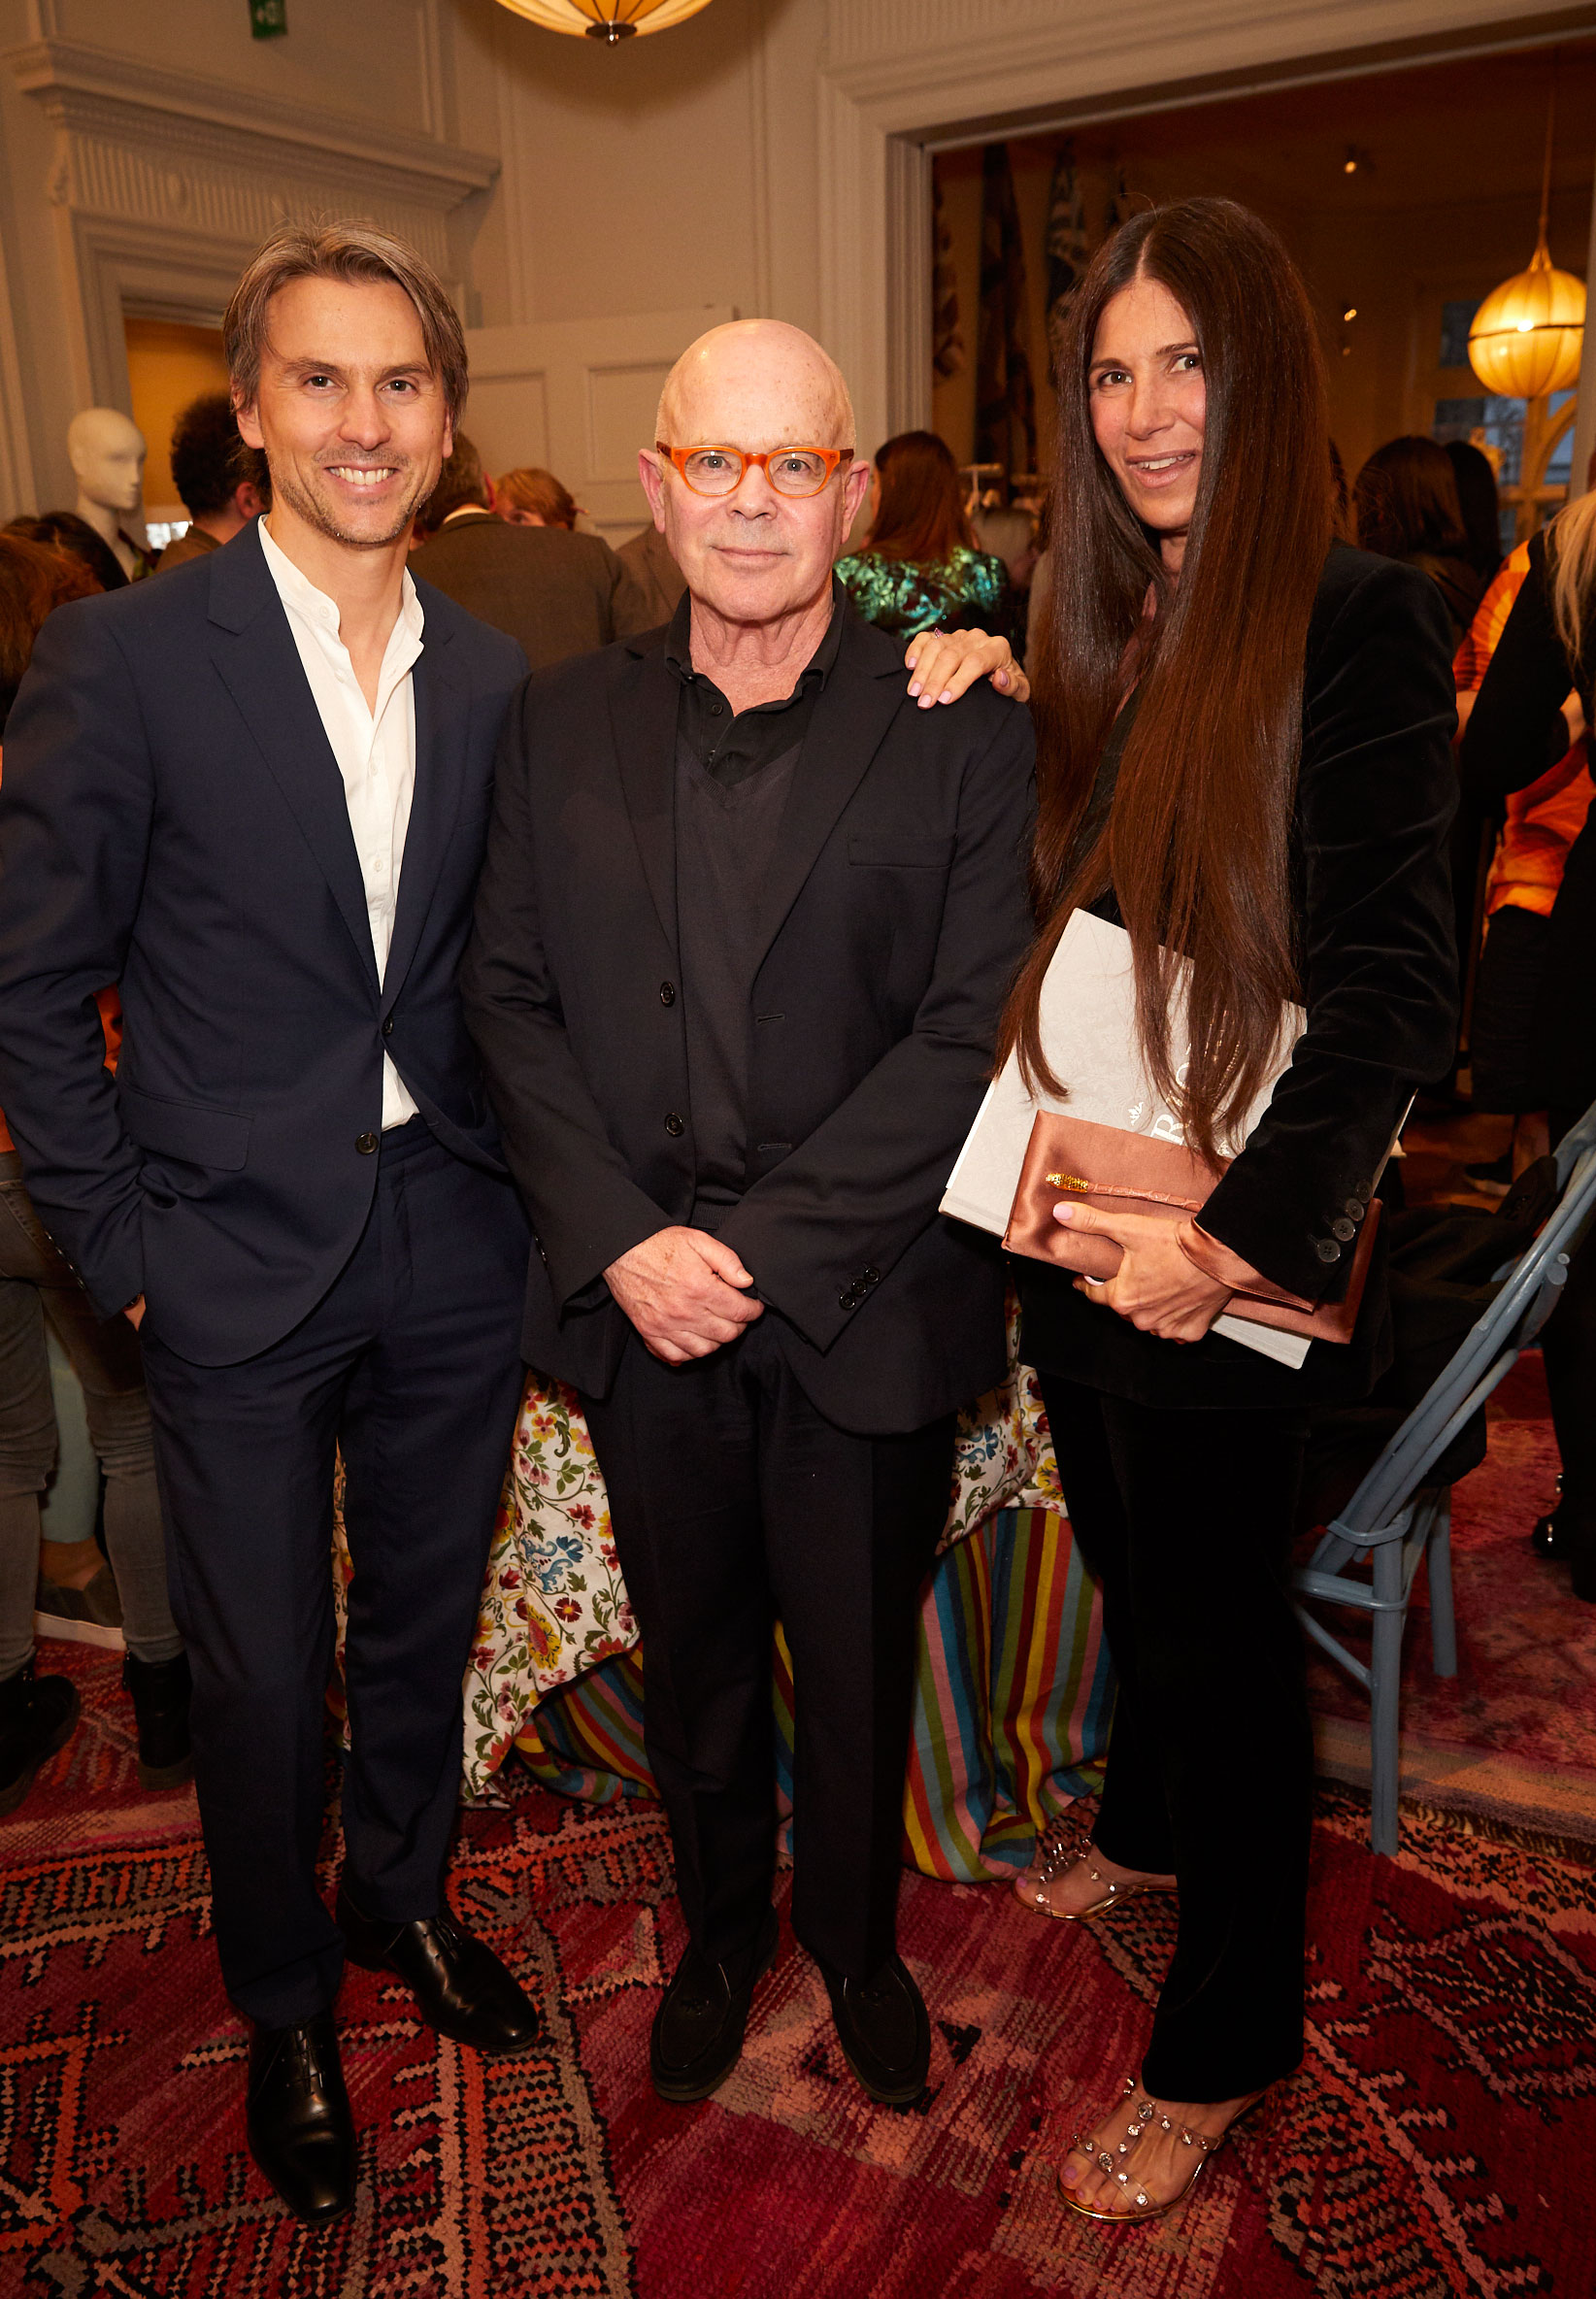 Ulric Jerome, William Norwich and Elizabeth Saltzman at the Interiors launch at MATCHESFASHION.COM in London